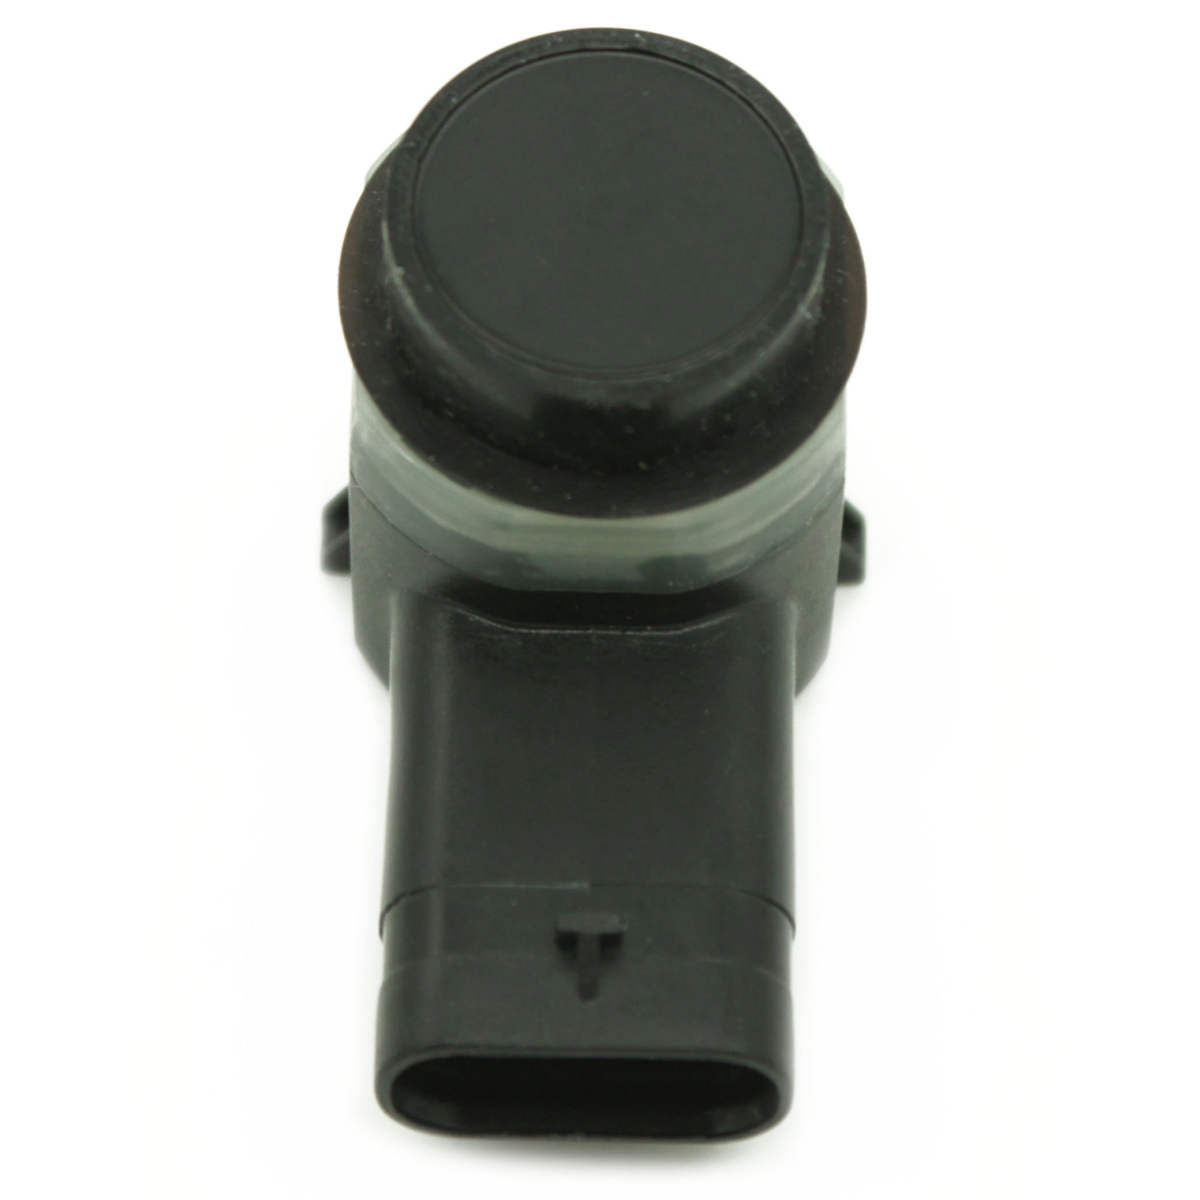 Park sensor 8A53-15K859-ABW for Ford PDC Parktronic